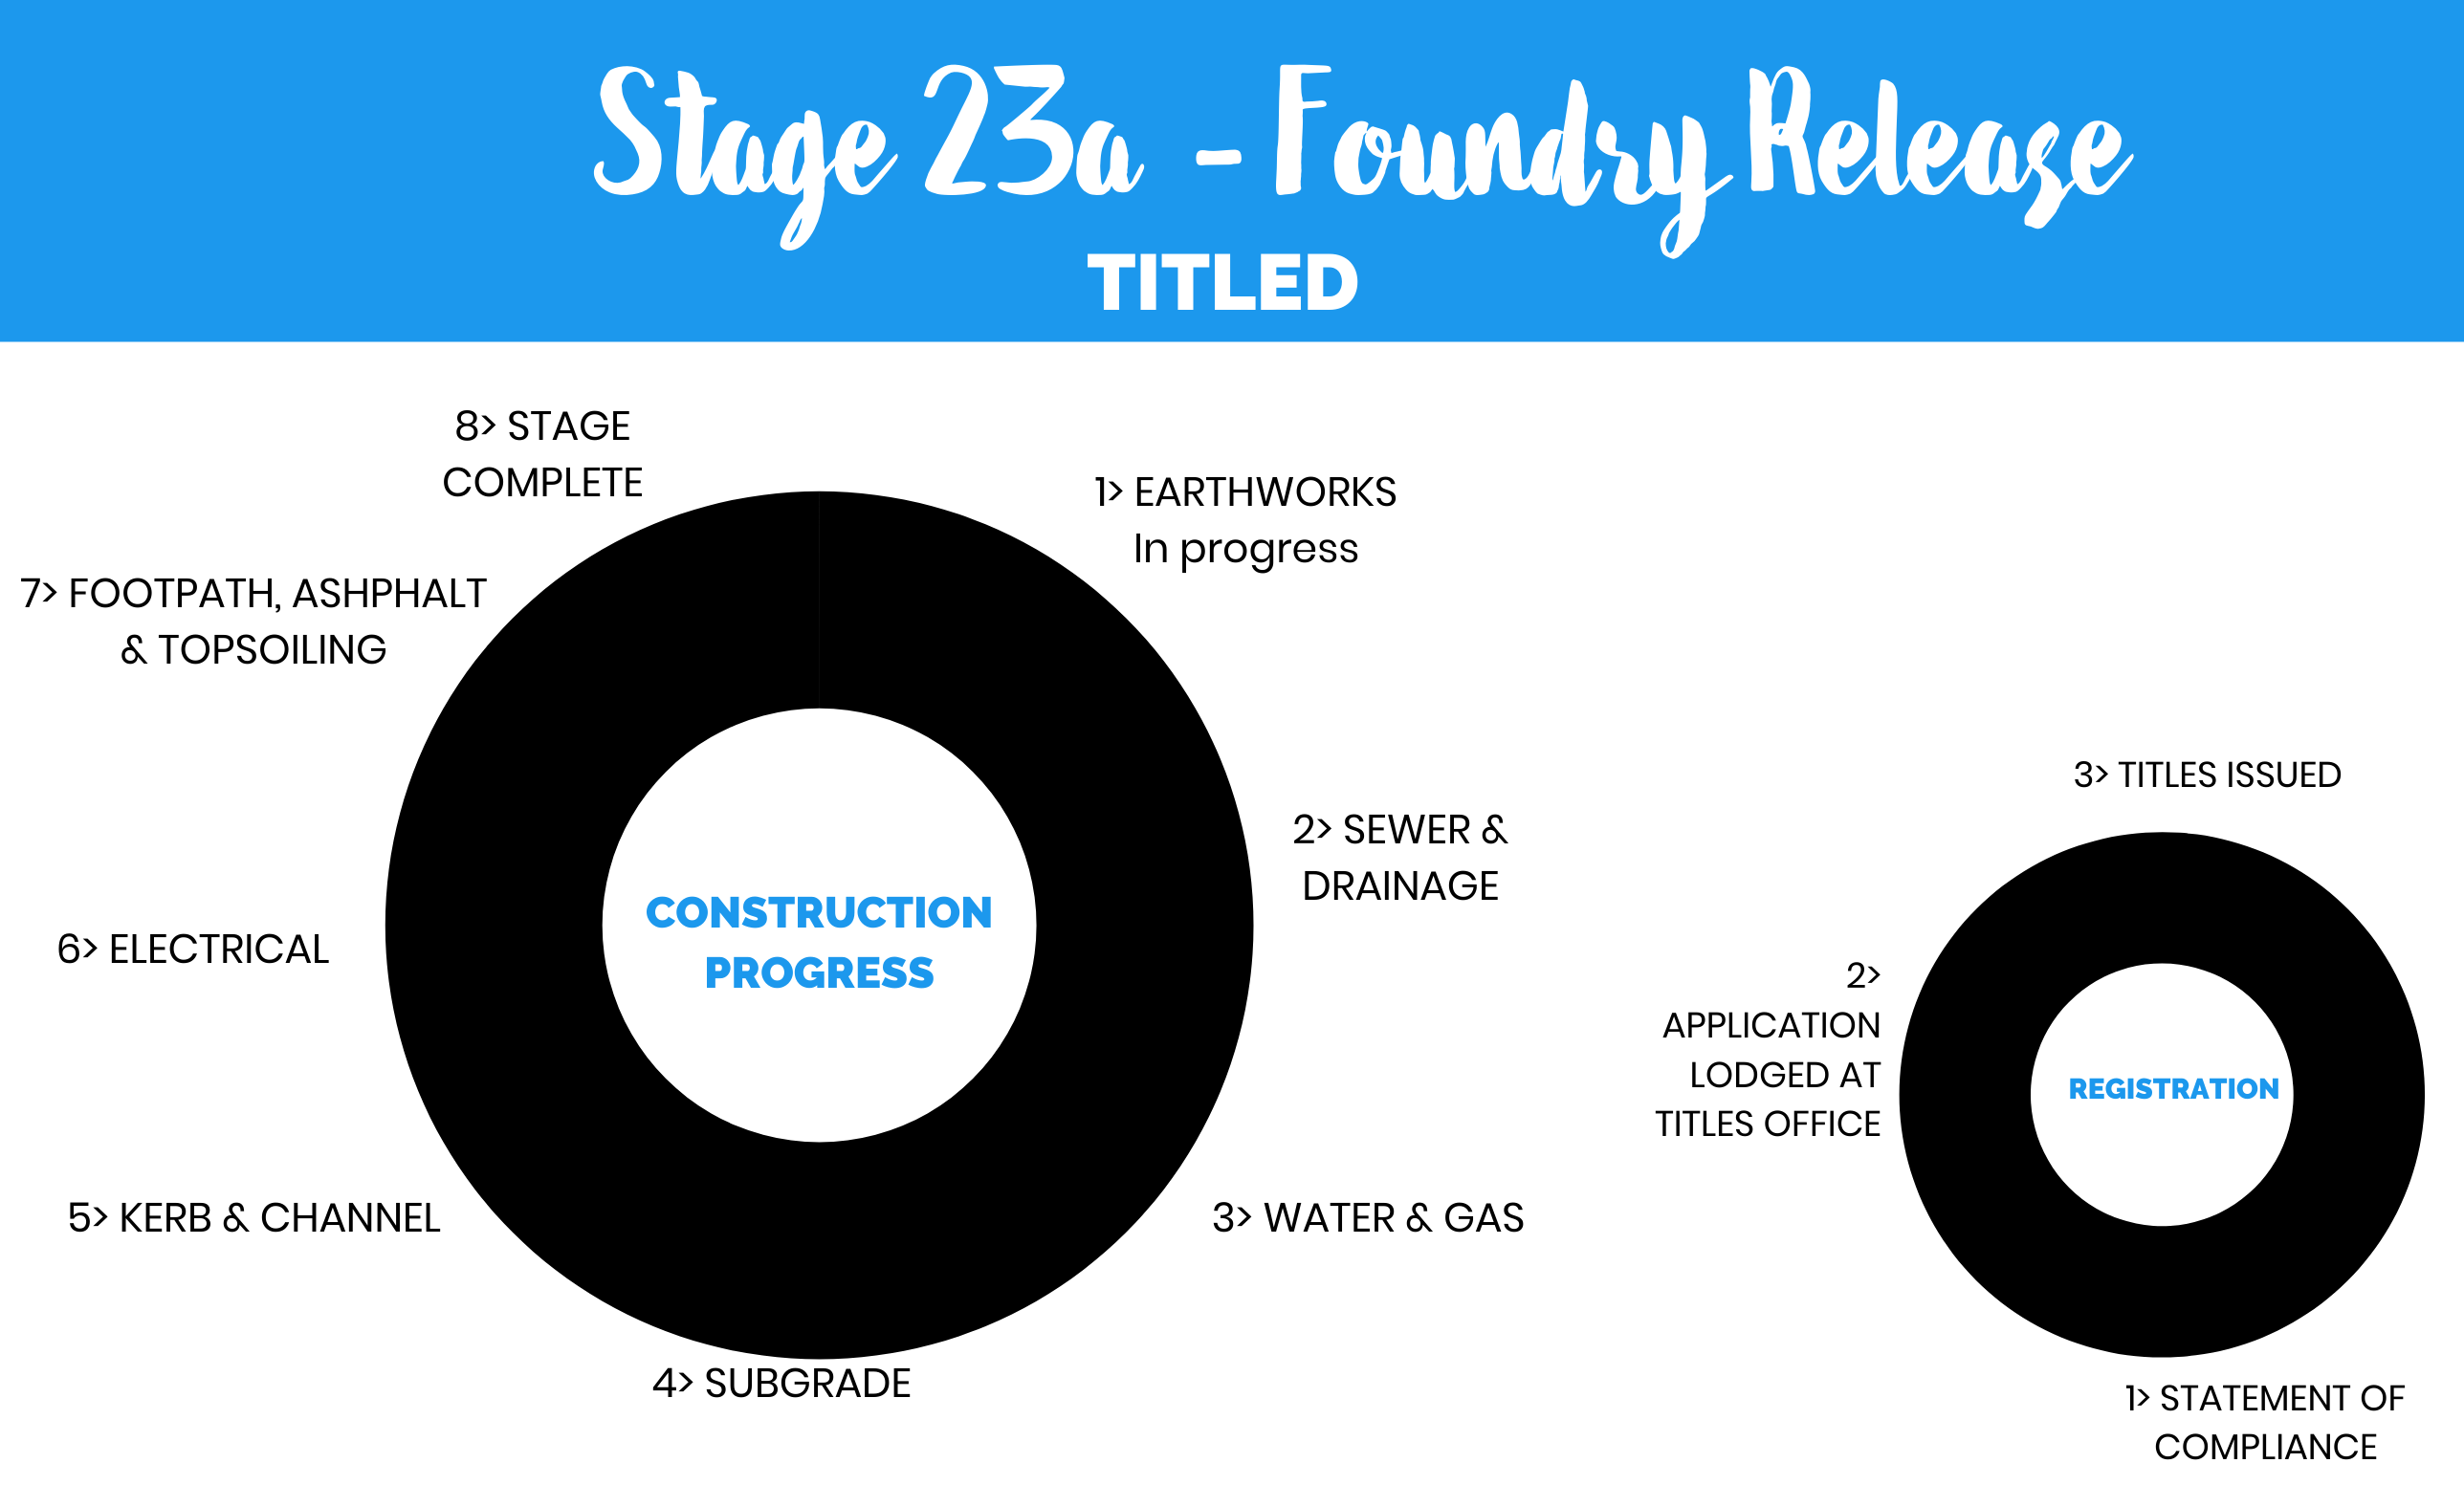 Stage 23A - Foundry Release